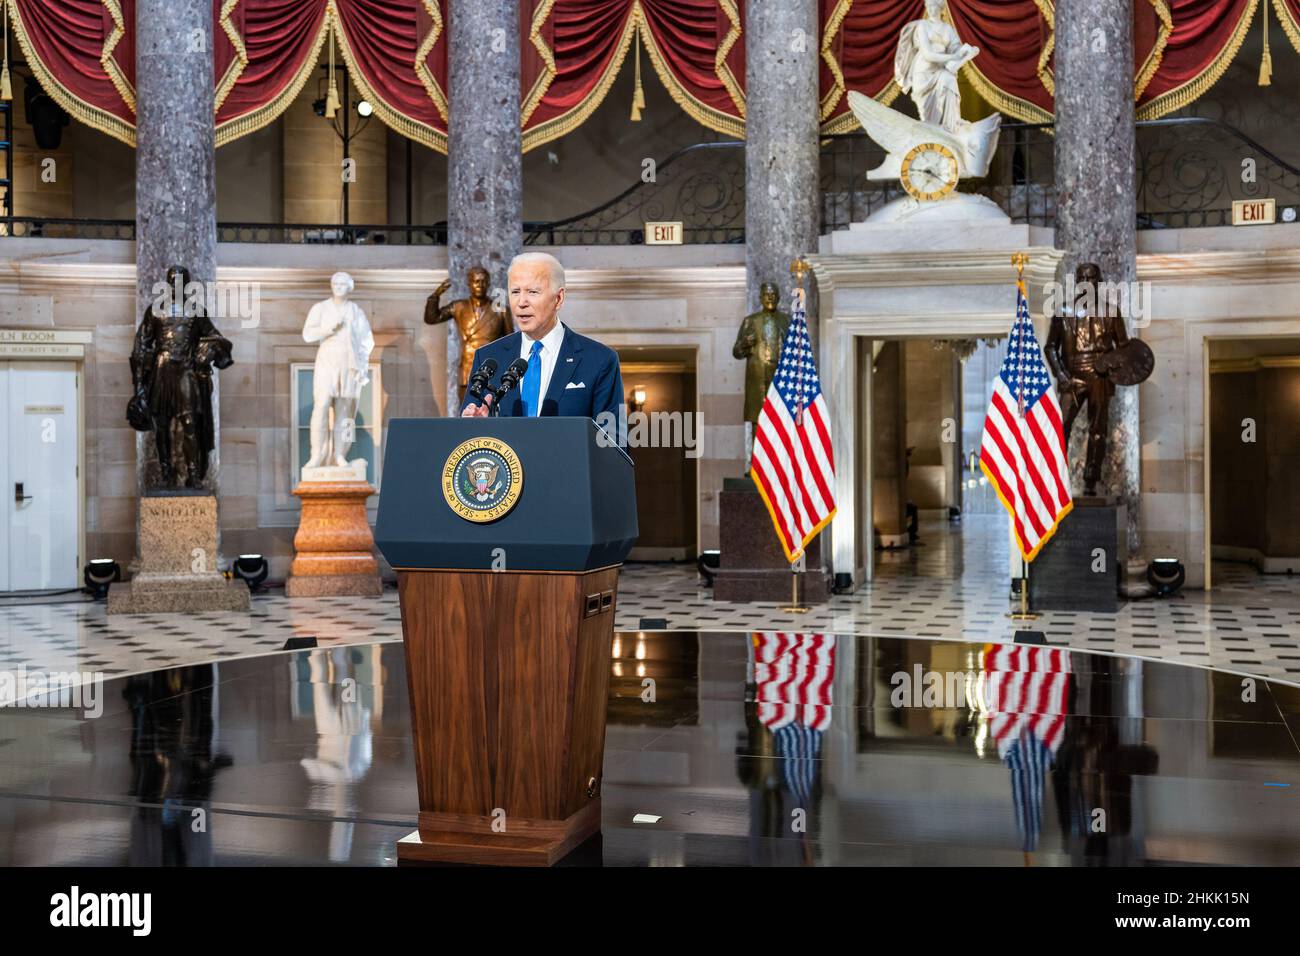 President Joe Biden delivers remarks on the january 6th insurrection at the U.S. Capitol. Stock Photo